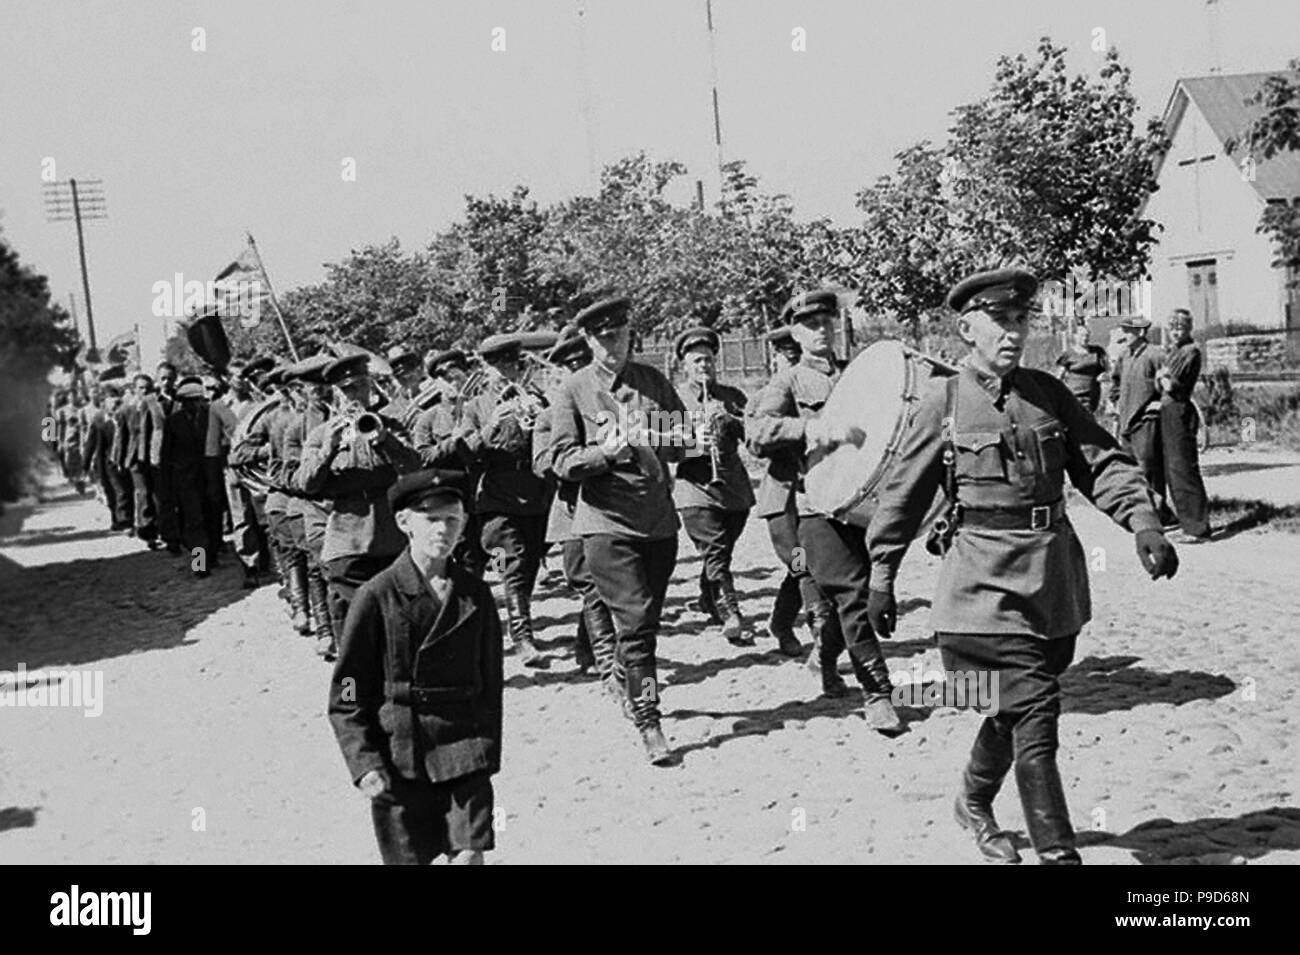 Soviet invasion and occupation of Estonia. Tallinn, 1940. Museum: Russian State Film and Photo Archive, Krasnogorsk. Stock Photo